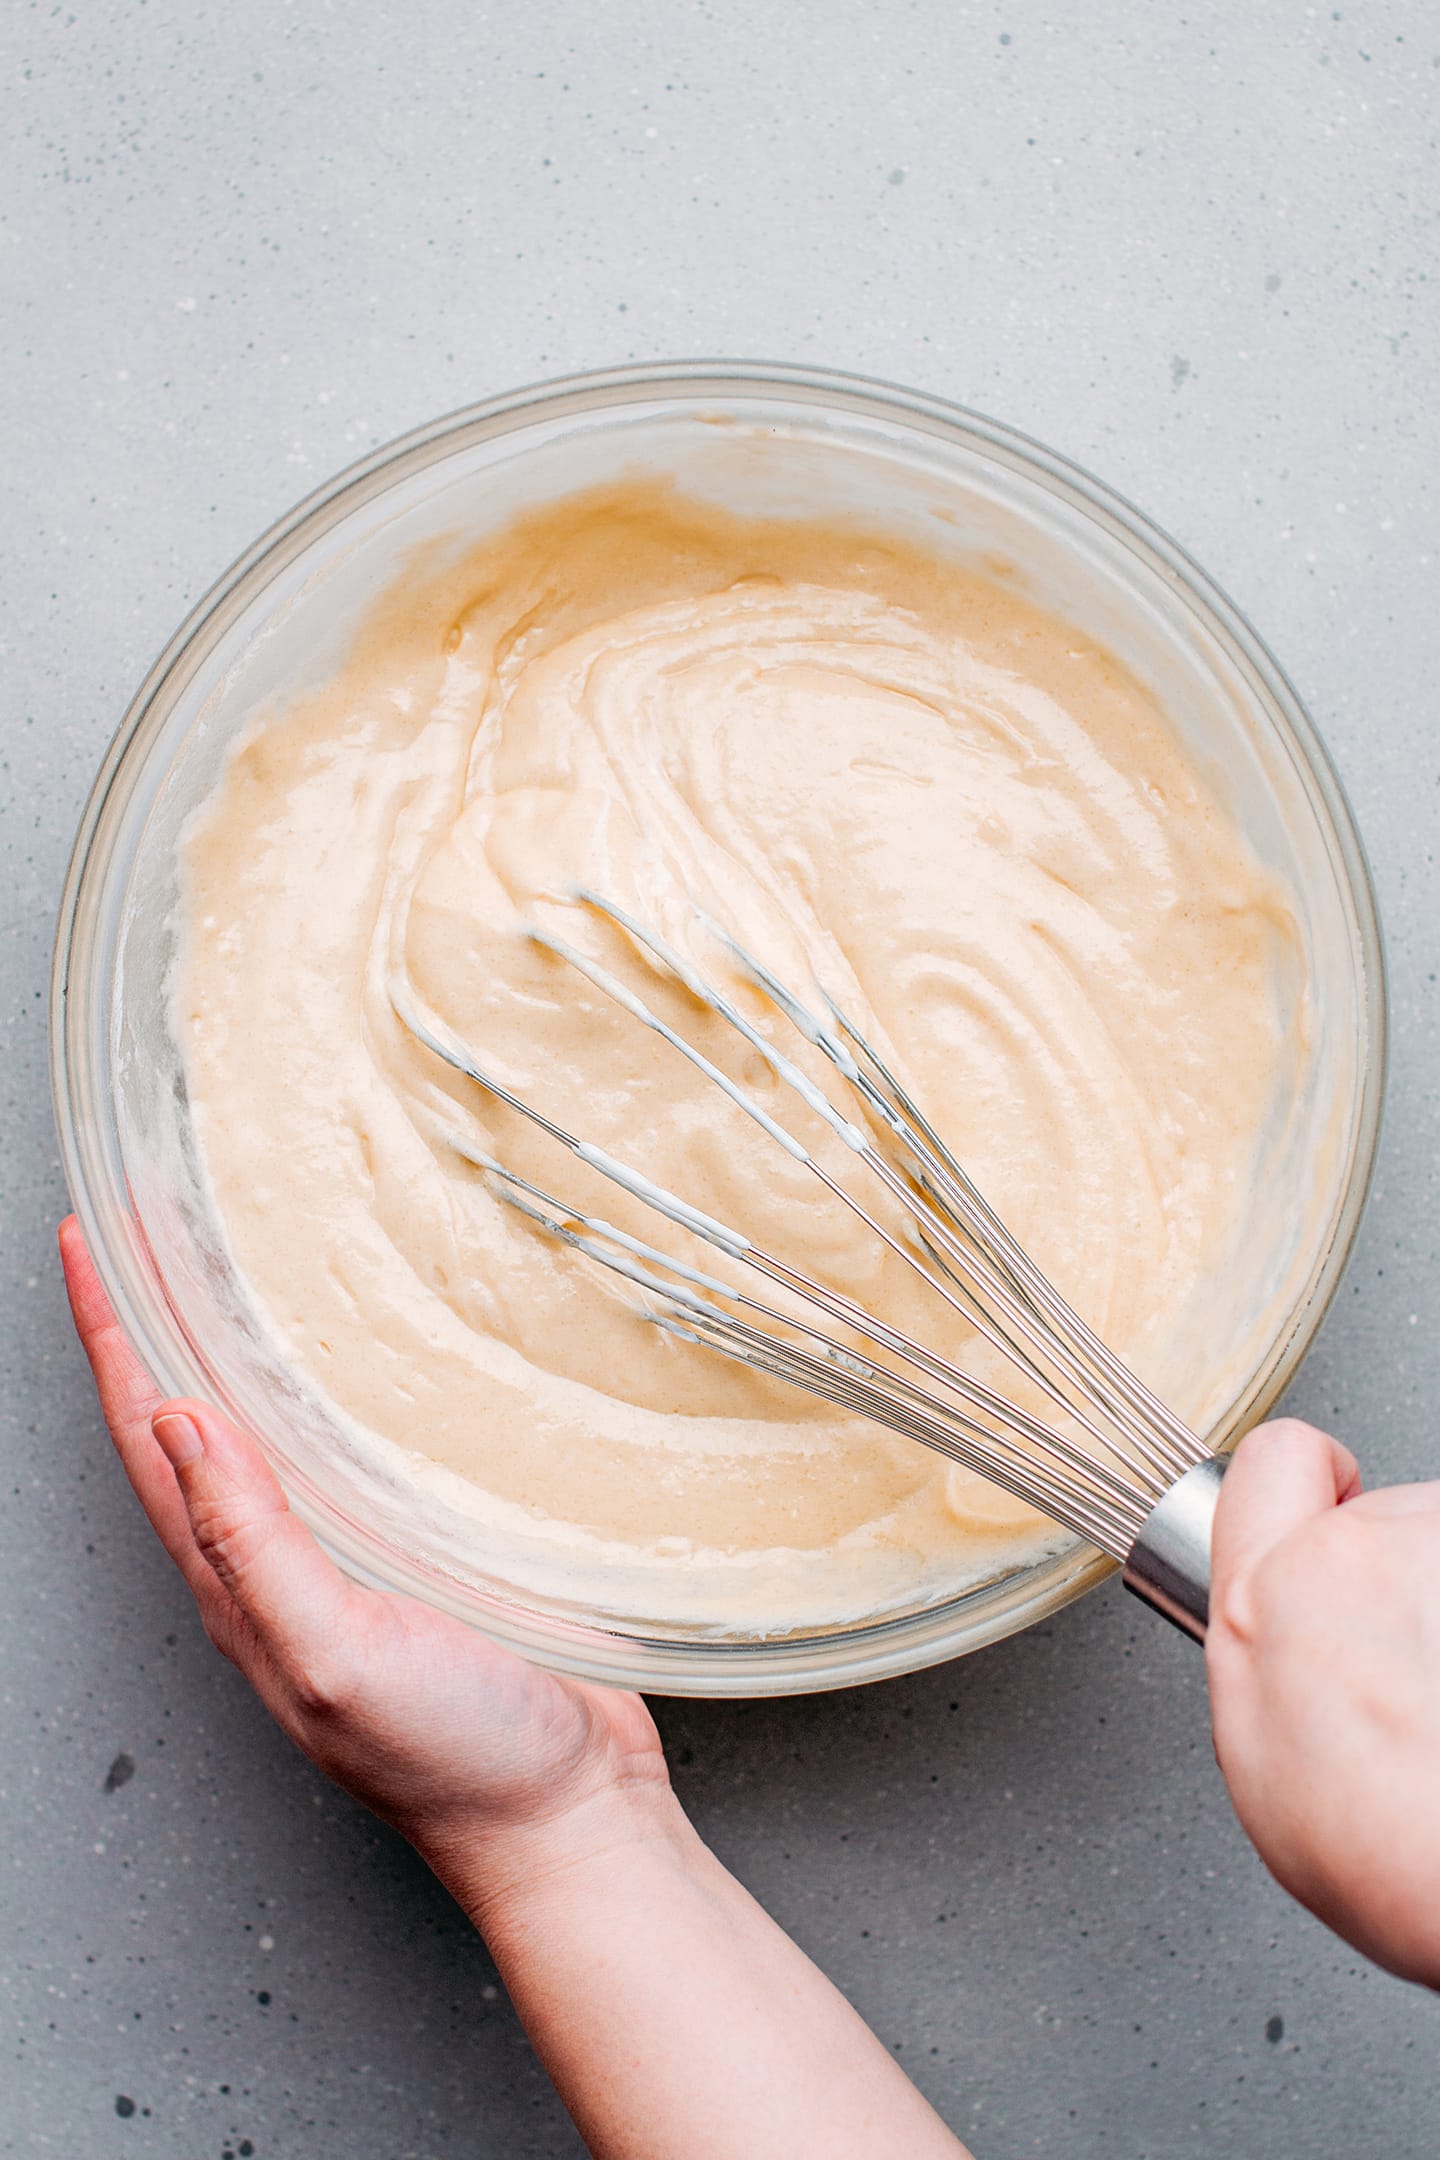 Whisking a muffin batter in a mixing bowl.